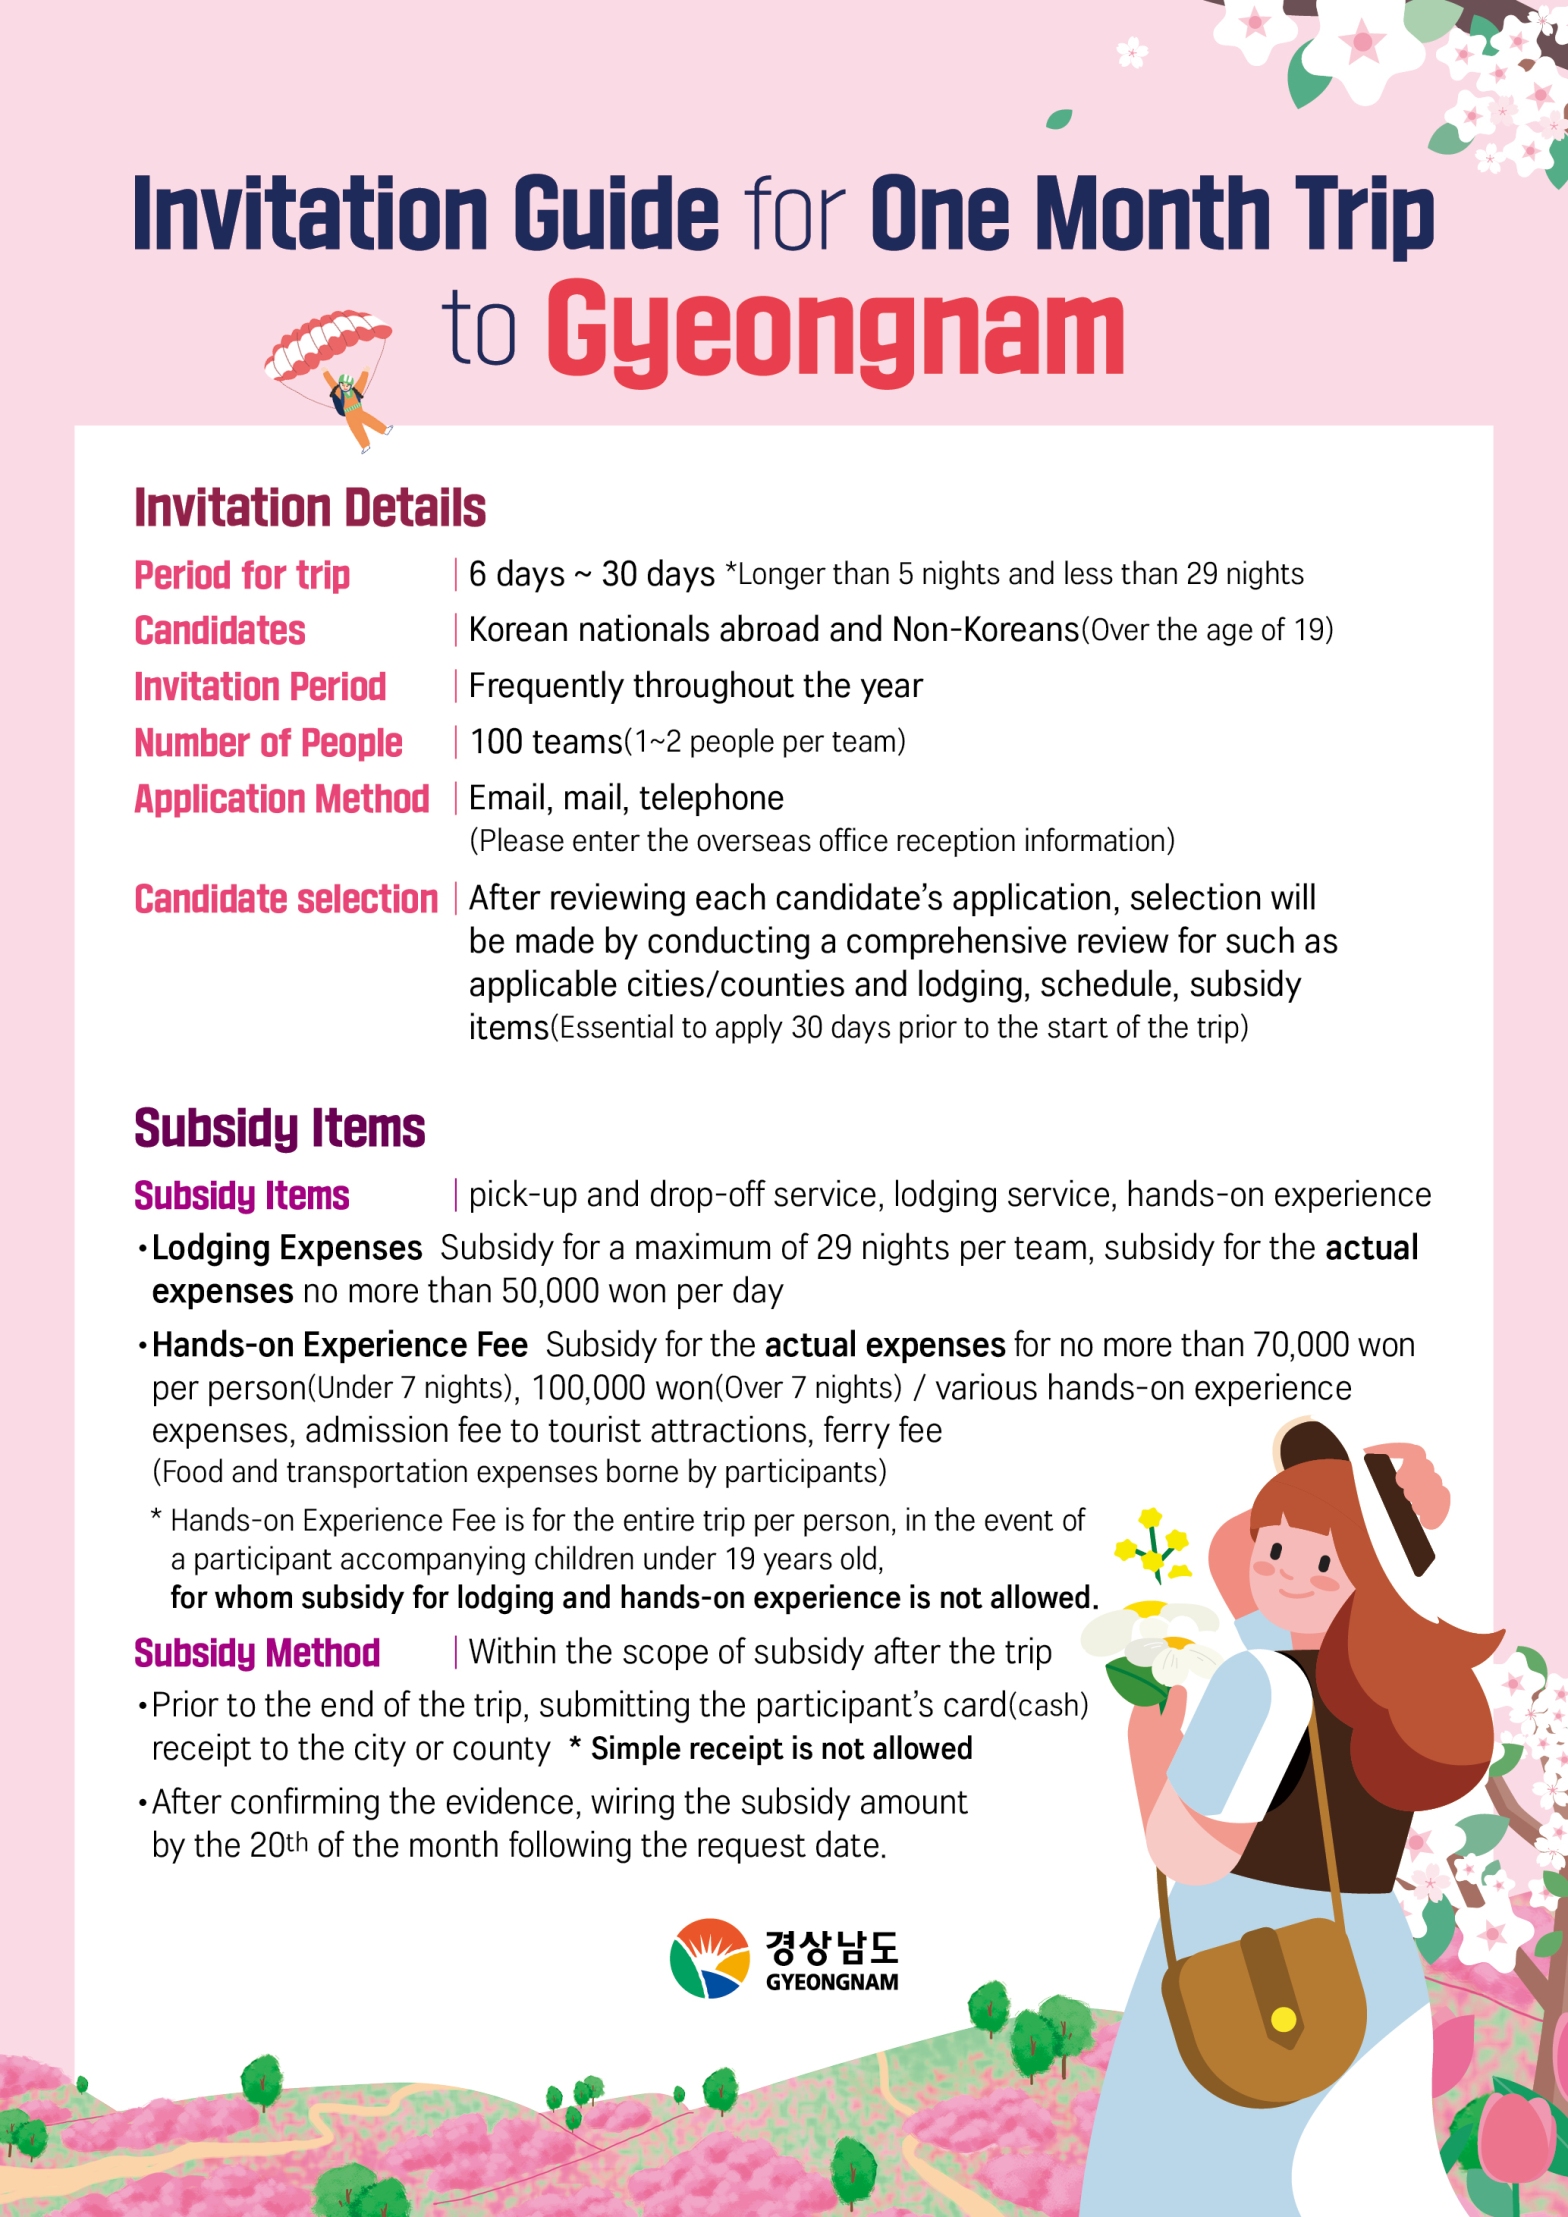 Invitation Guide for One Month Trip to Gyeongnam